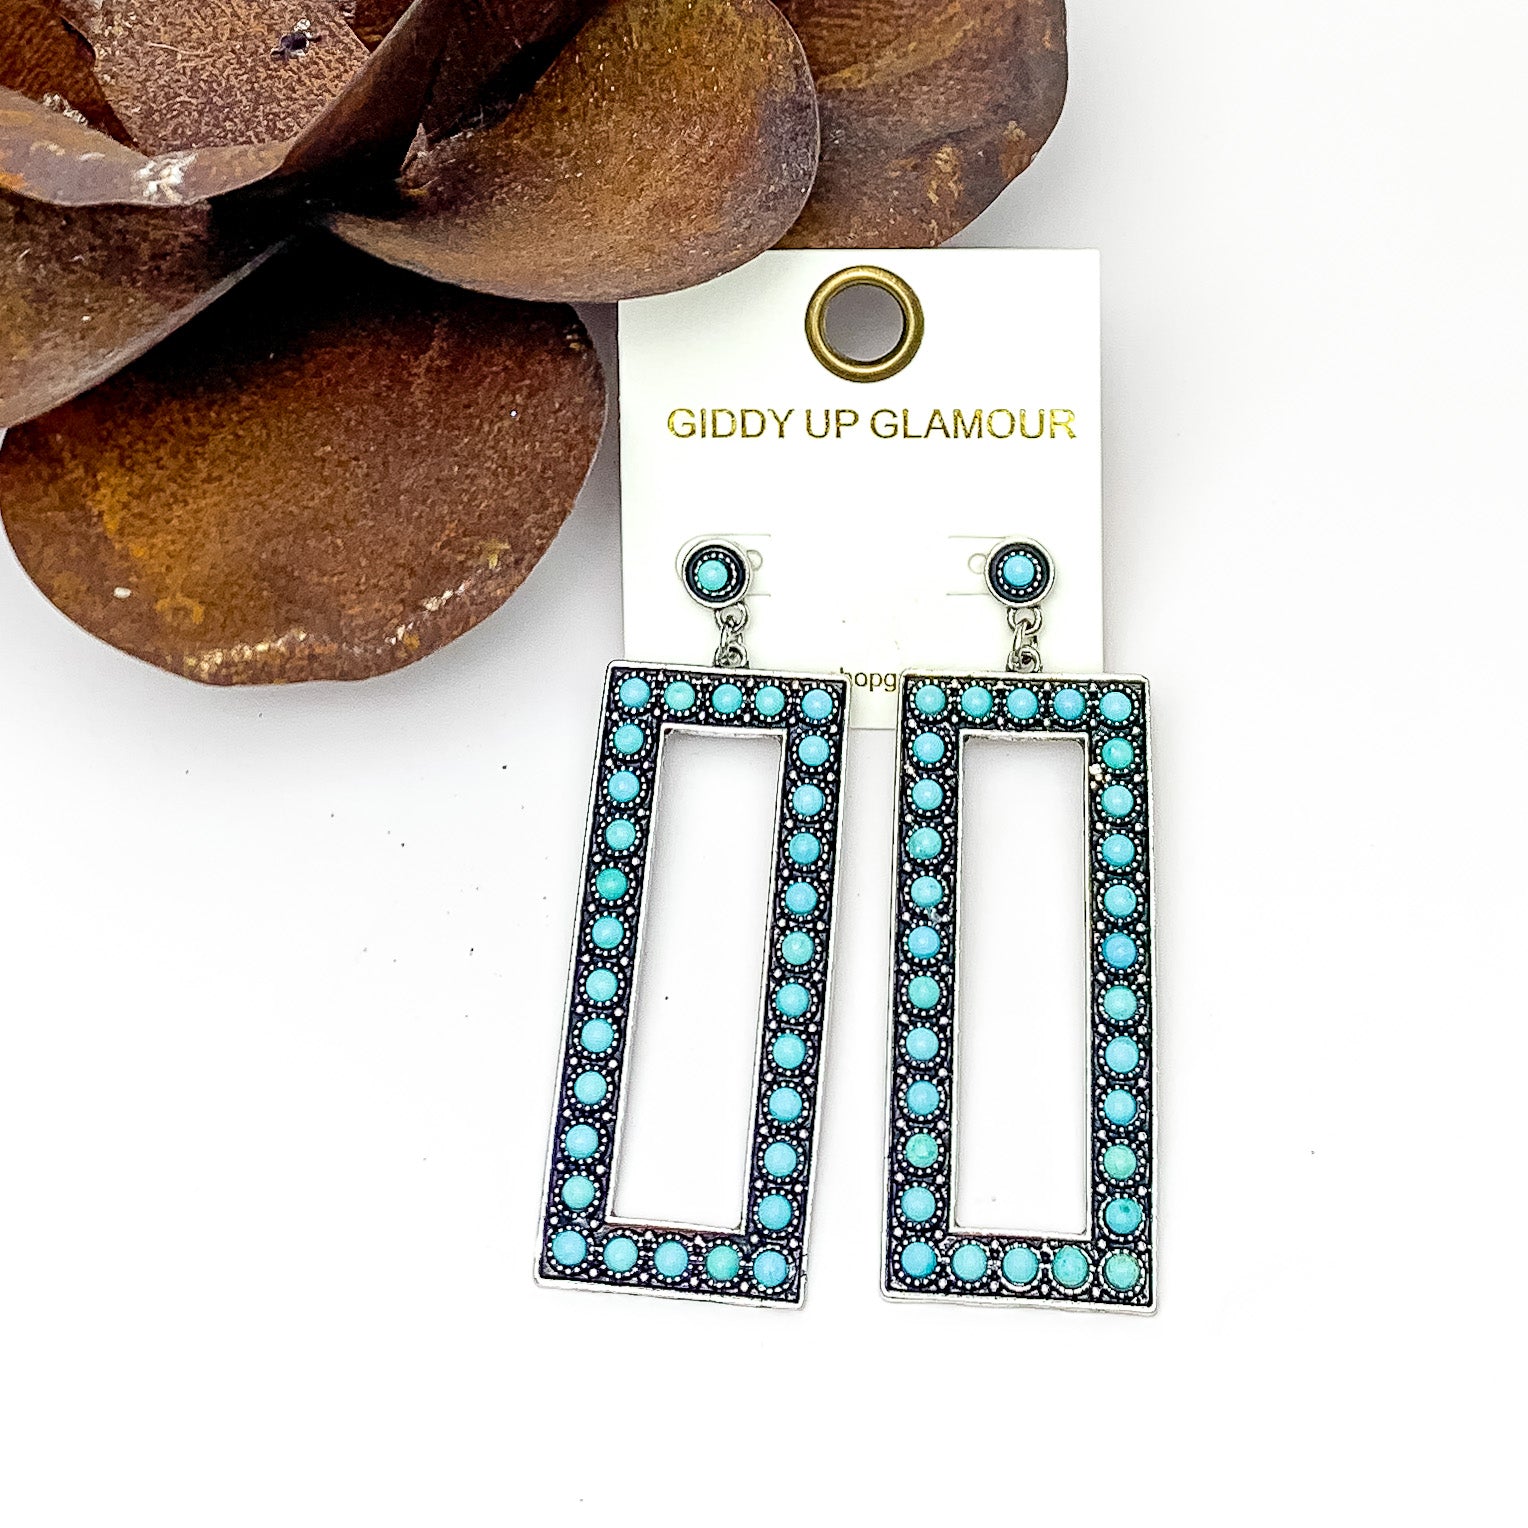 Silver Tone Rectangular Drop Earrings With Stones in Turquoise Blue - Giddy Up Glamour Boutique